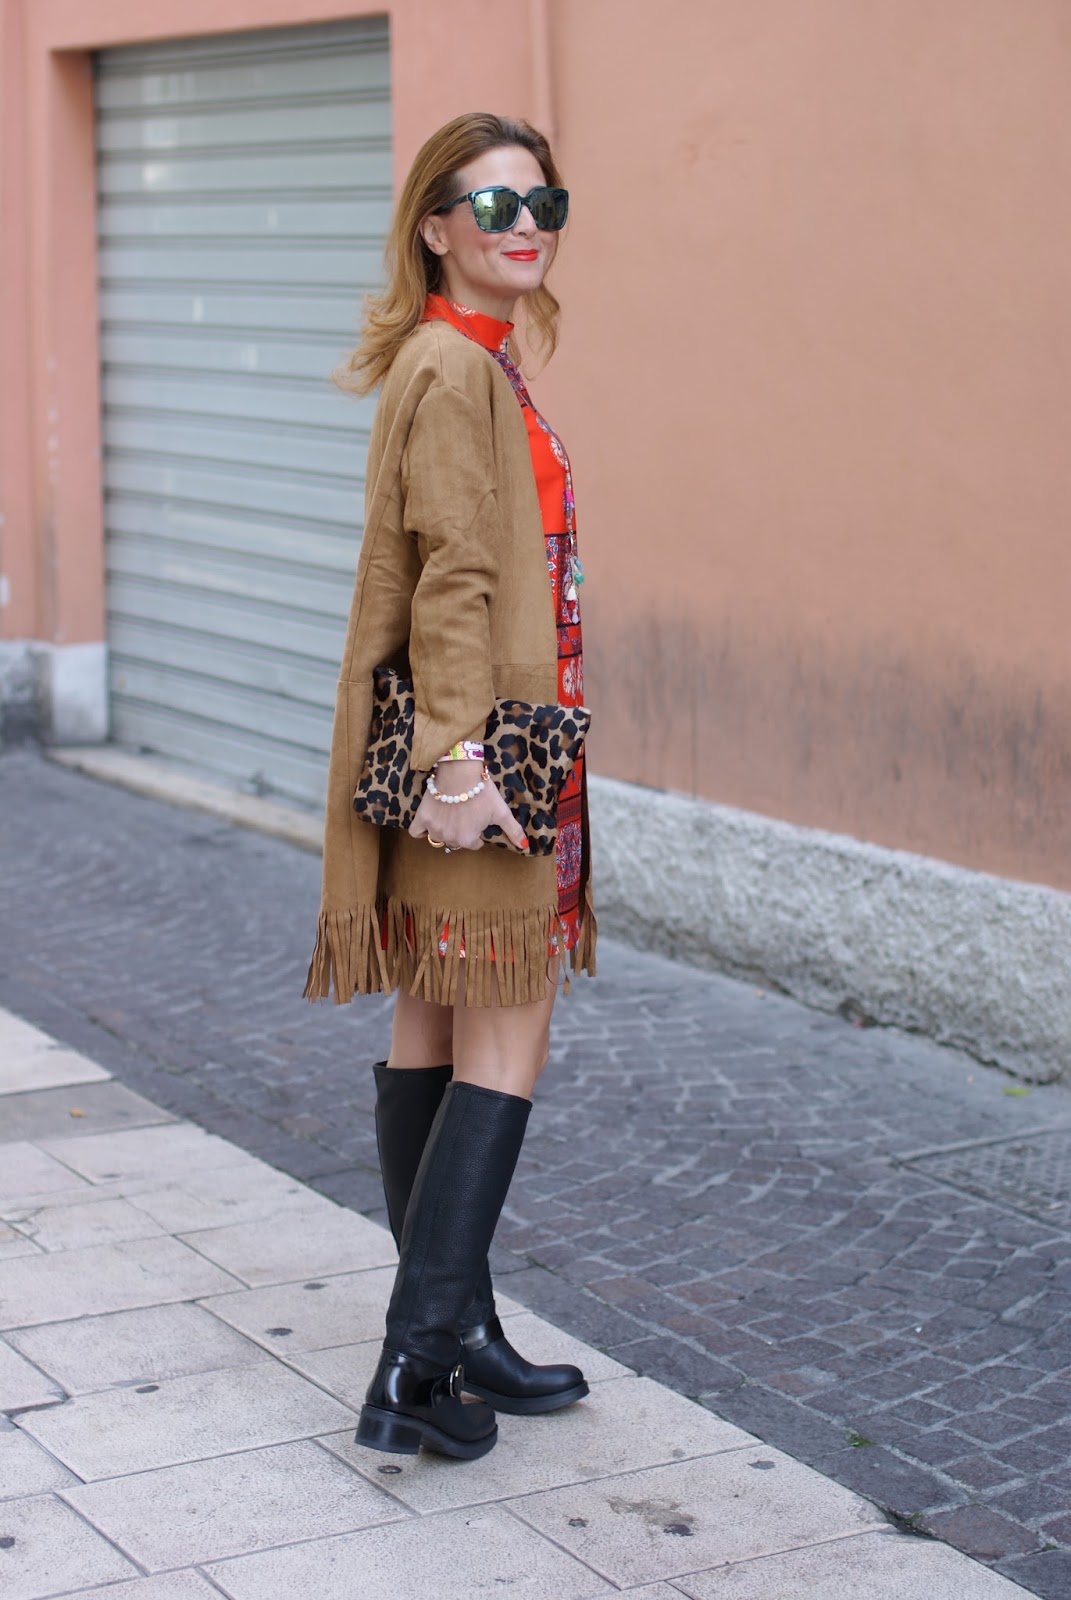 Suedette fringed coat from Yoins and Lorenzo Mari boots on Fashion and Cookies fashion blog, fashion blogger style